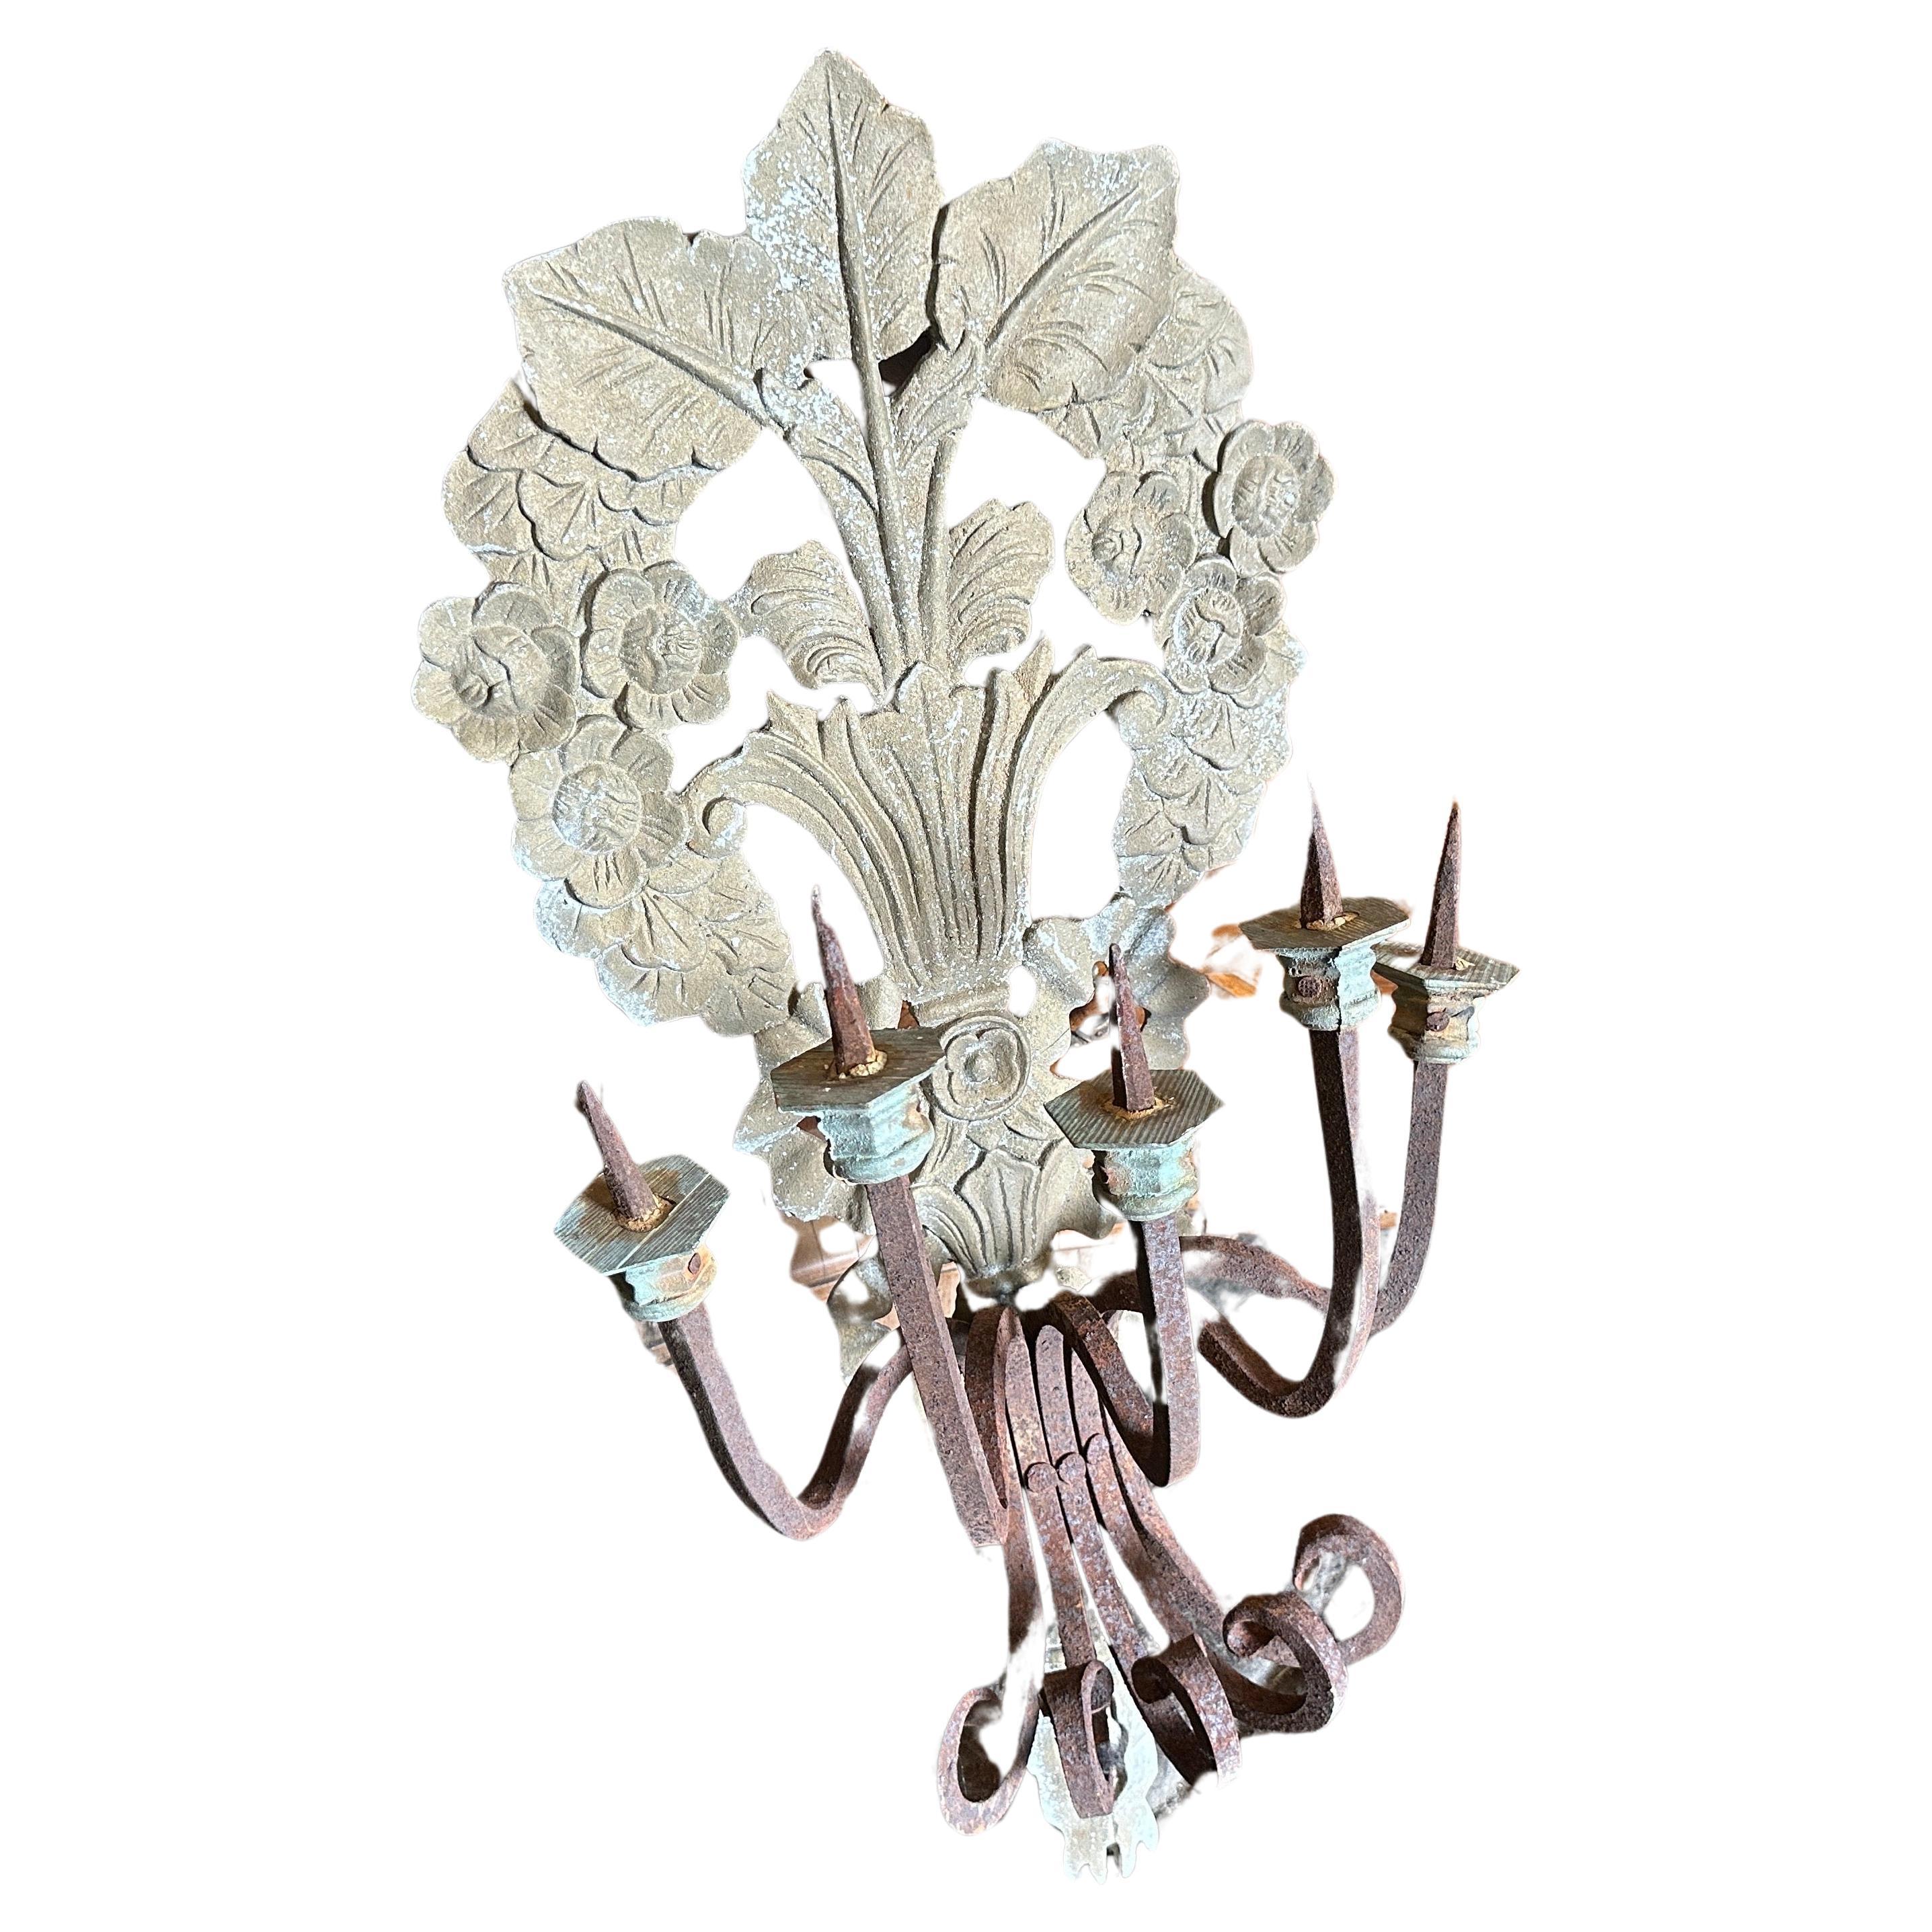 1900 Art Nouveau Iron and Wood Italian Chandelier Wall Sconce For Sale